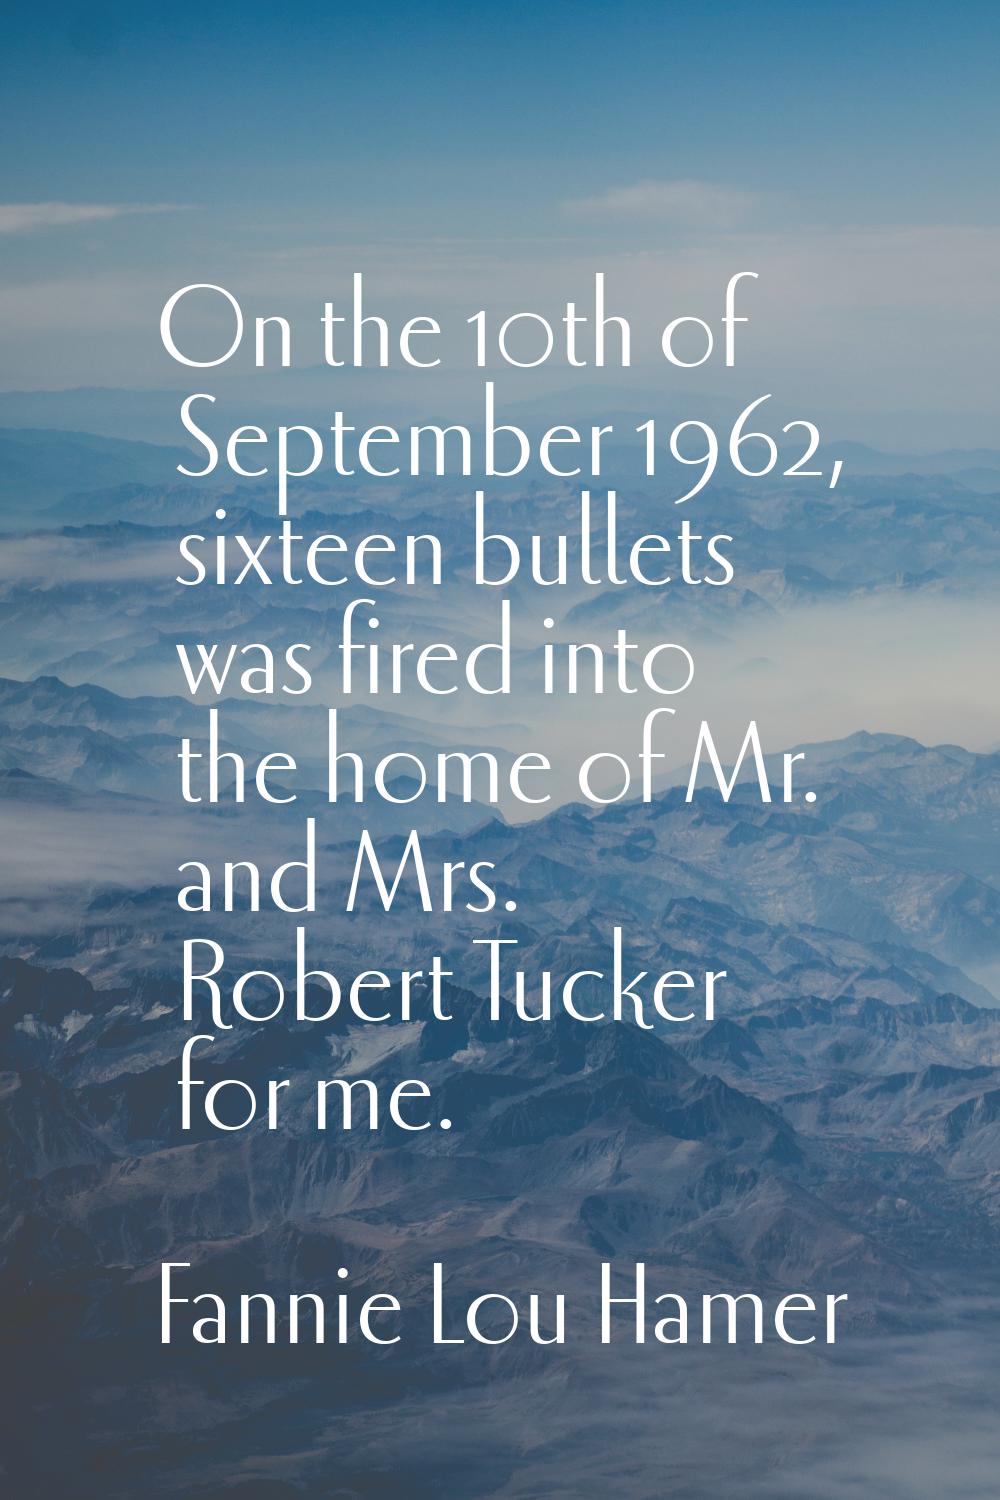 On the 10th of September 1962, sixteen bullets was fired into the home of Mr. and Mrs. Robert Tucke